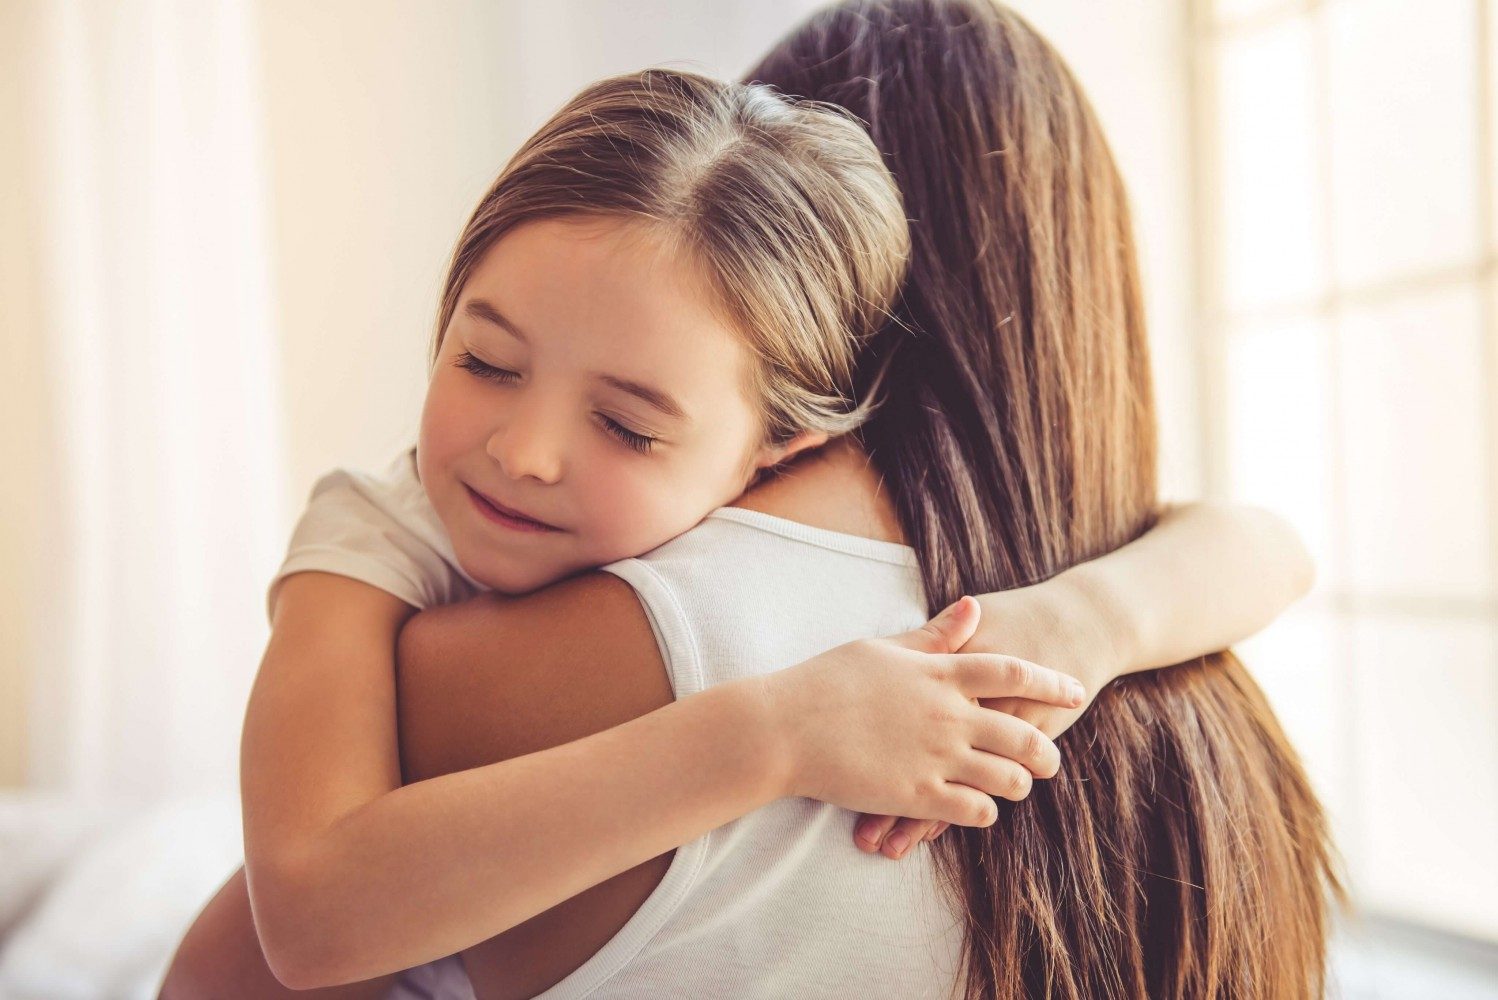 How to Teach Your Child Empathy